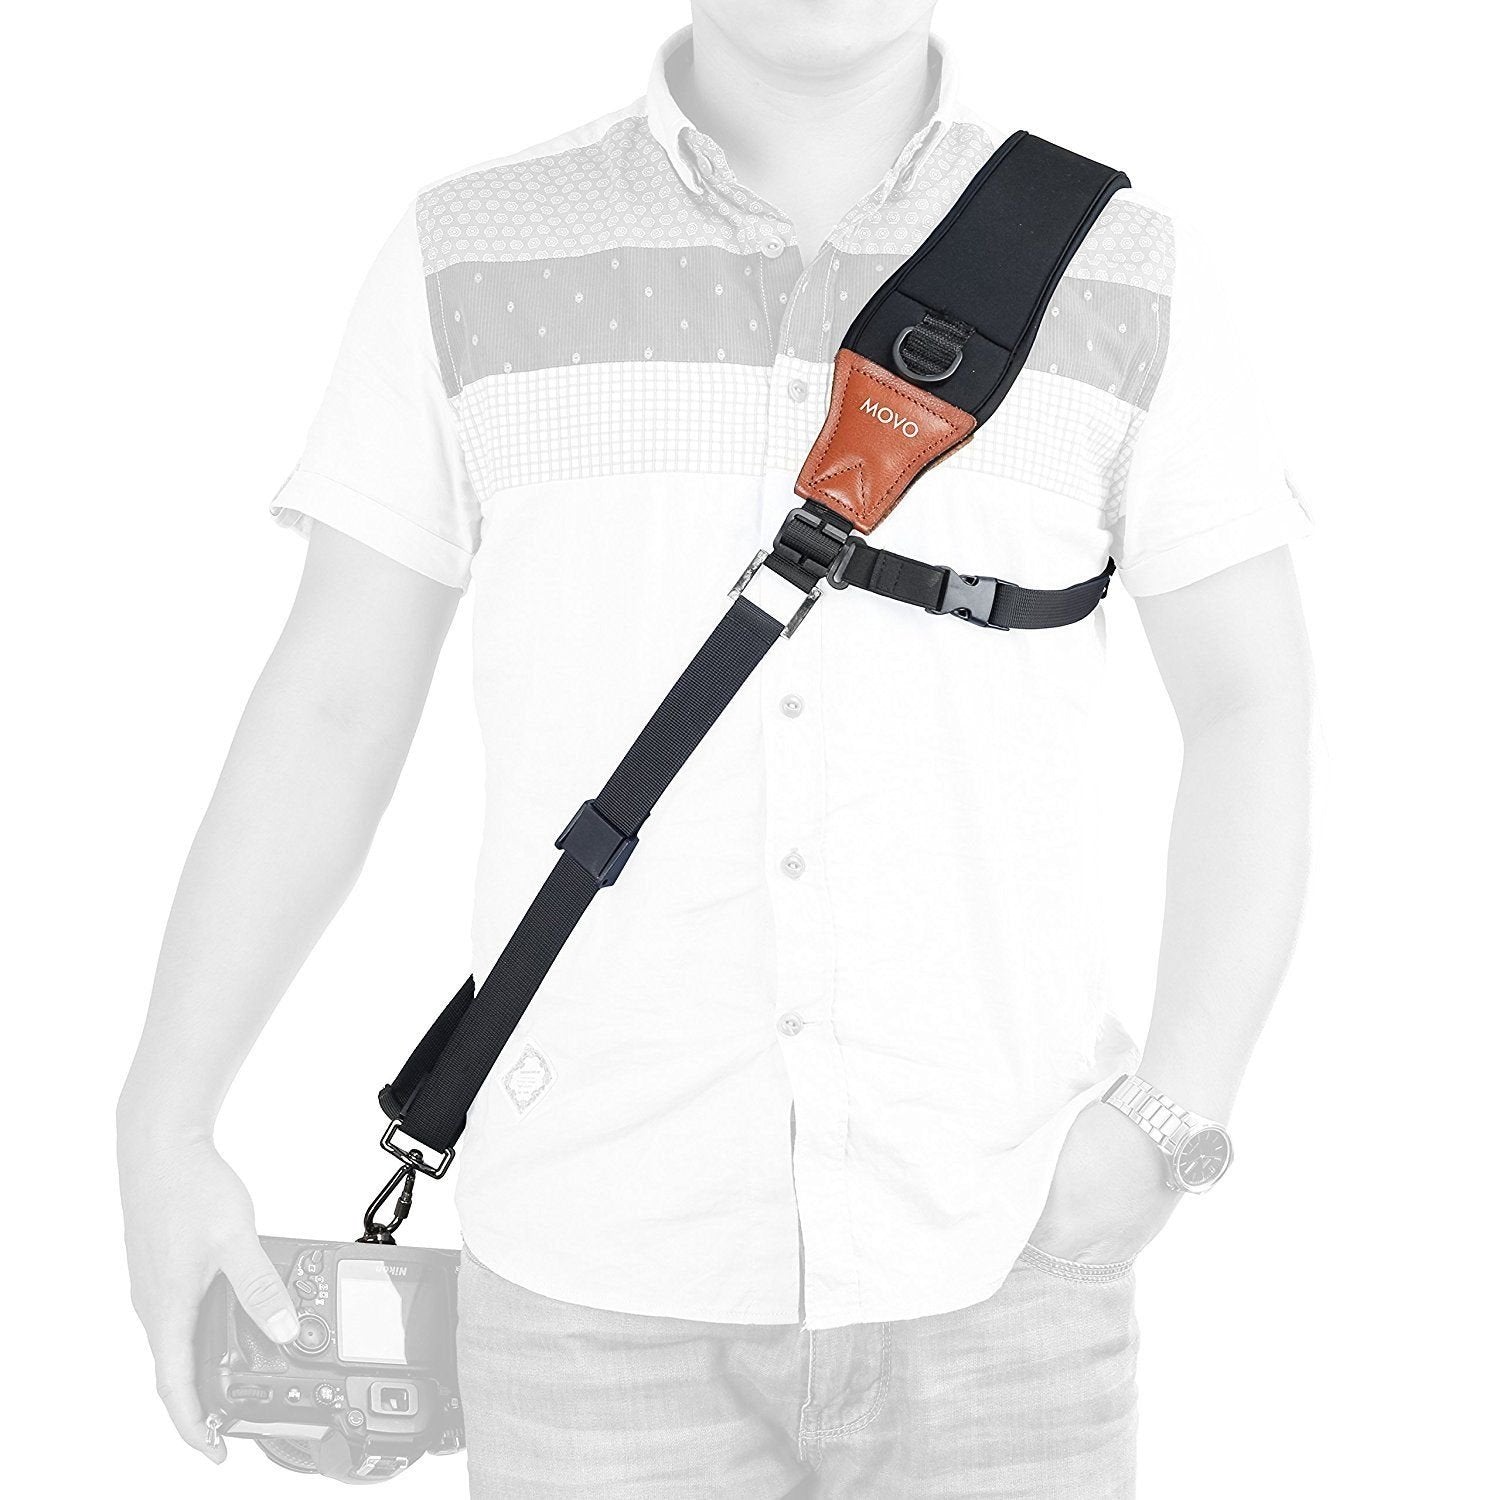 Movo Rapid Action Over-The-Shoulder Camera Sling Strap with Quick Release Clip  - Very Good